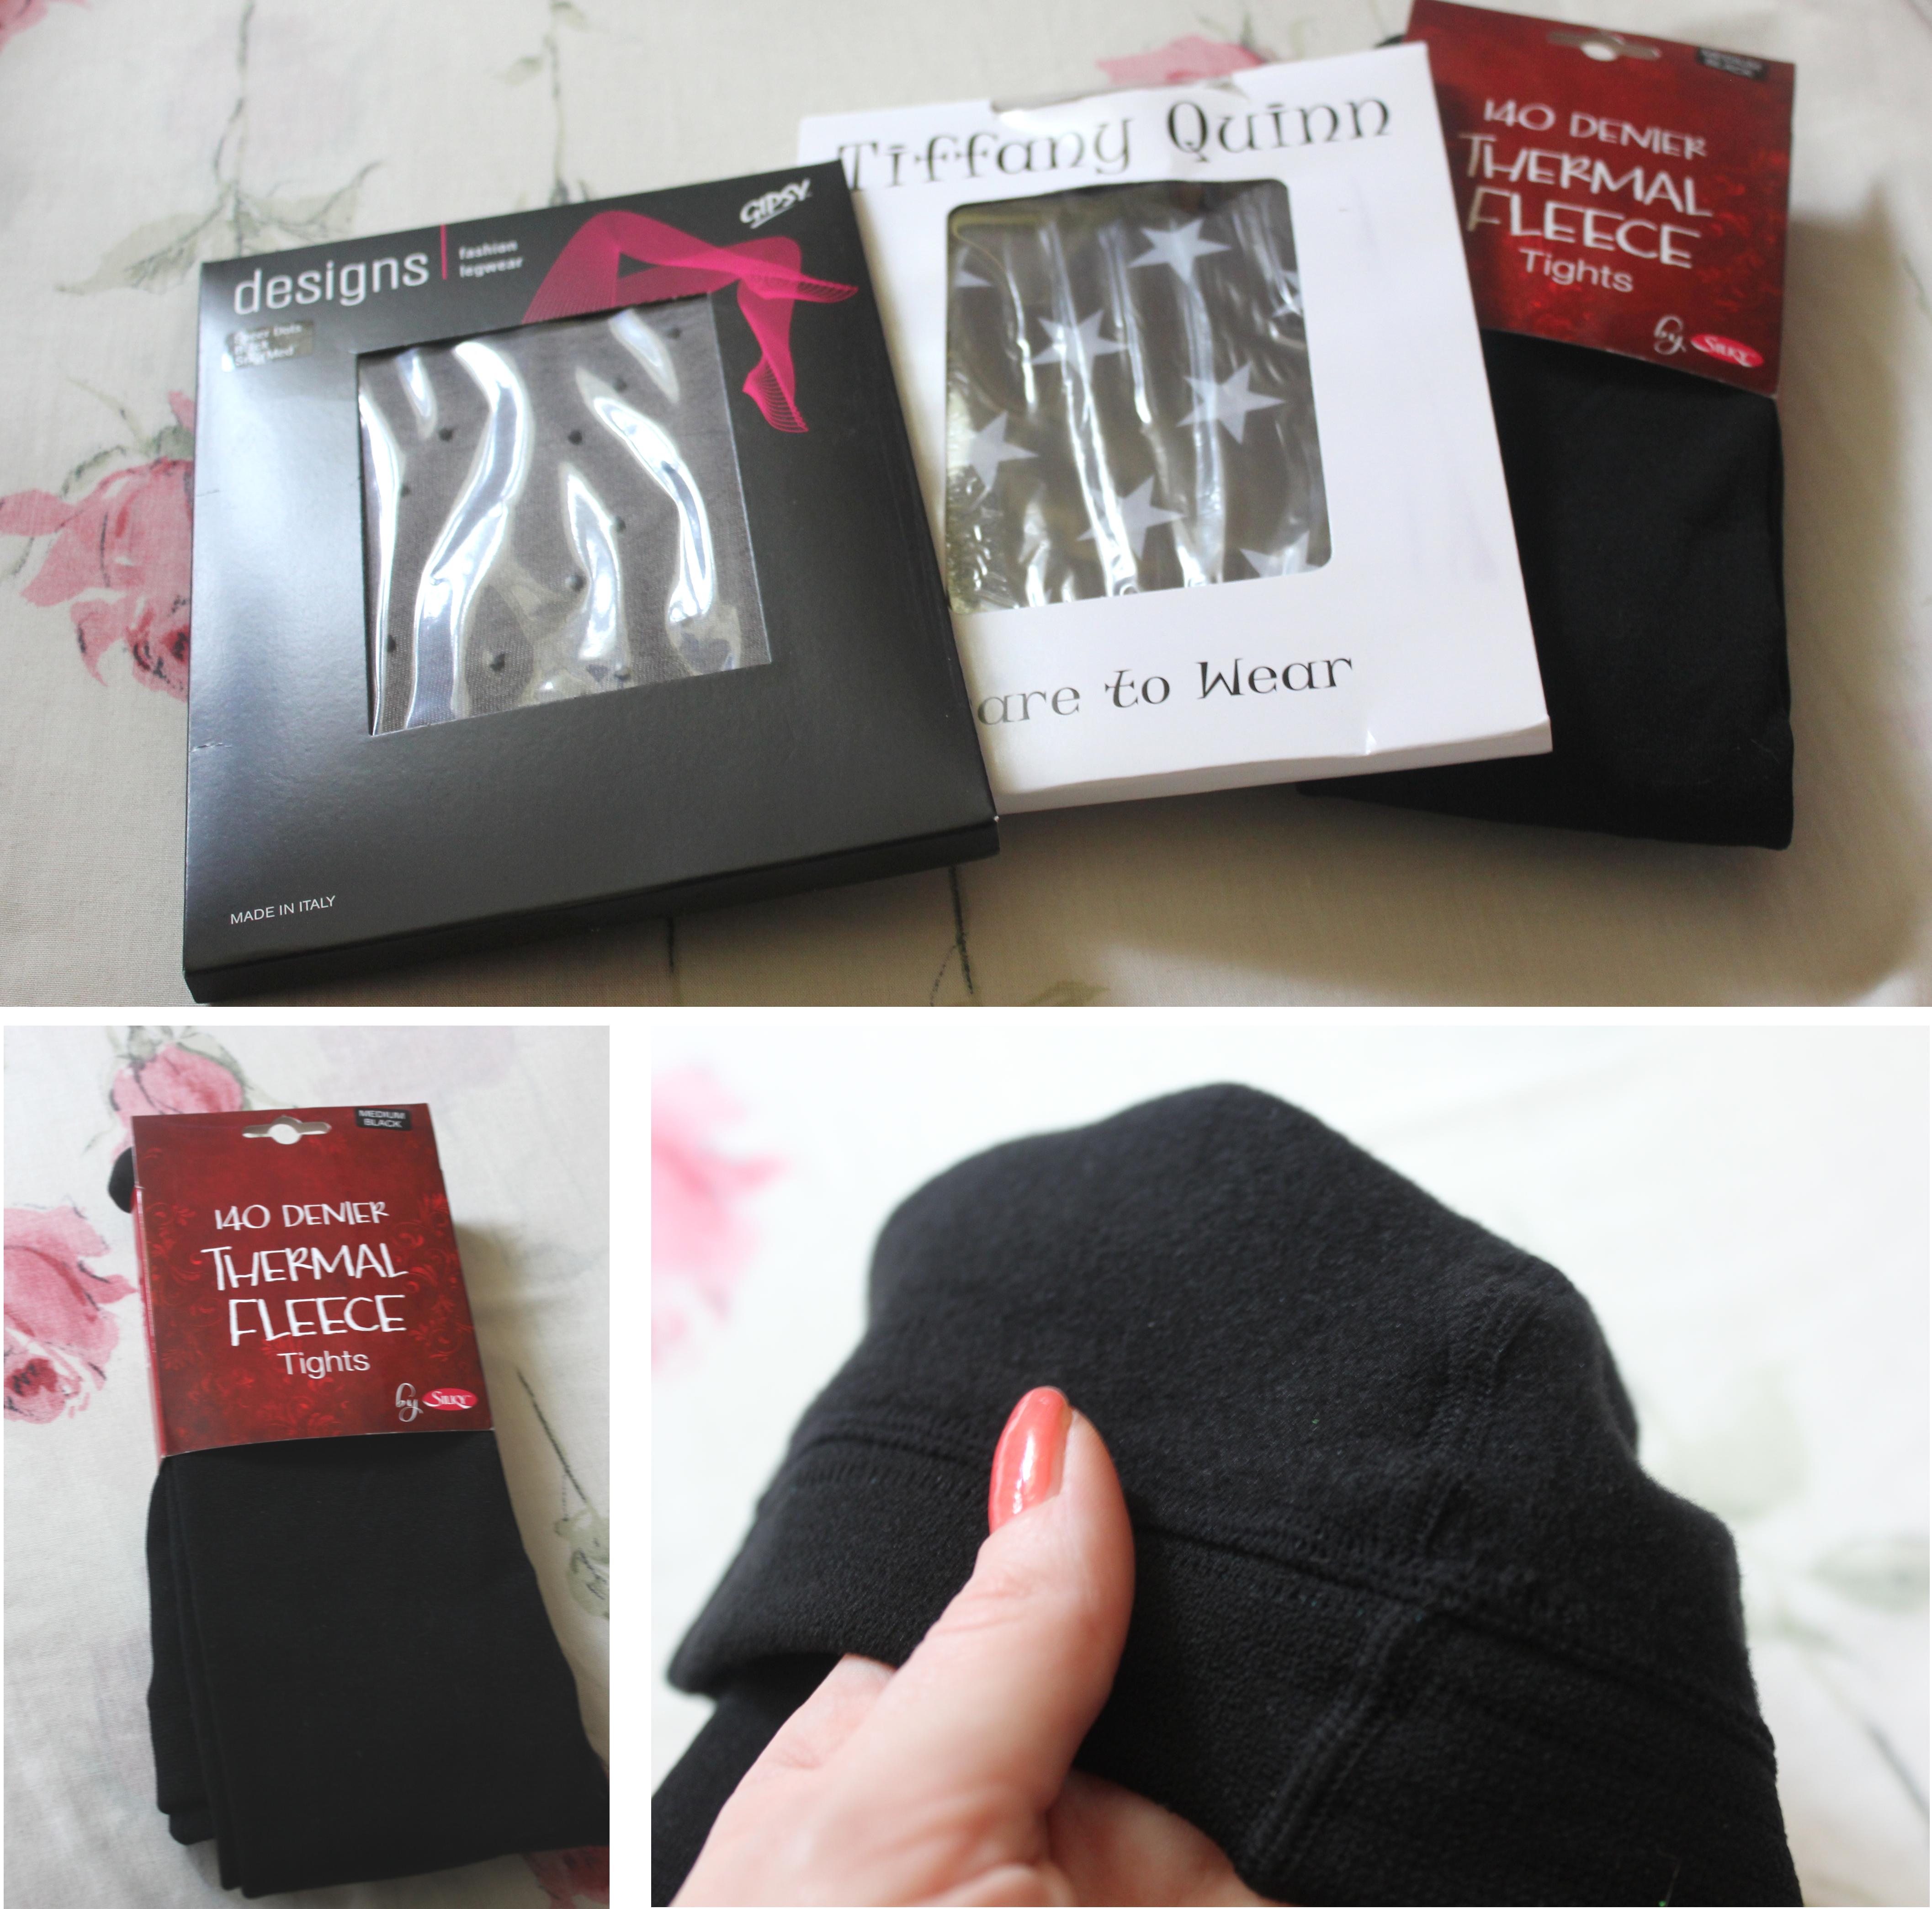 Dawns UK Tights review from Cassiefairy - thermal fleece hoisery